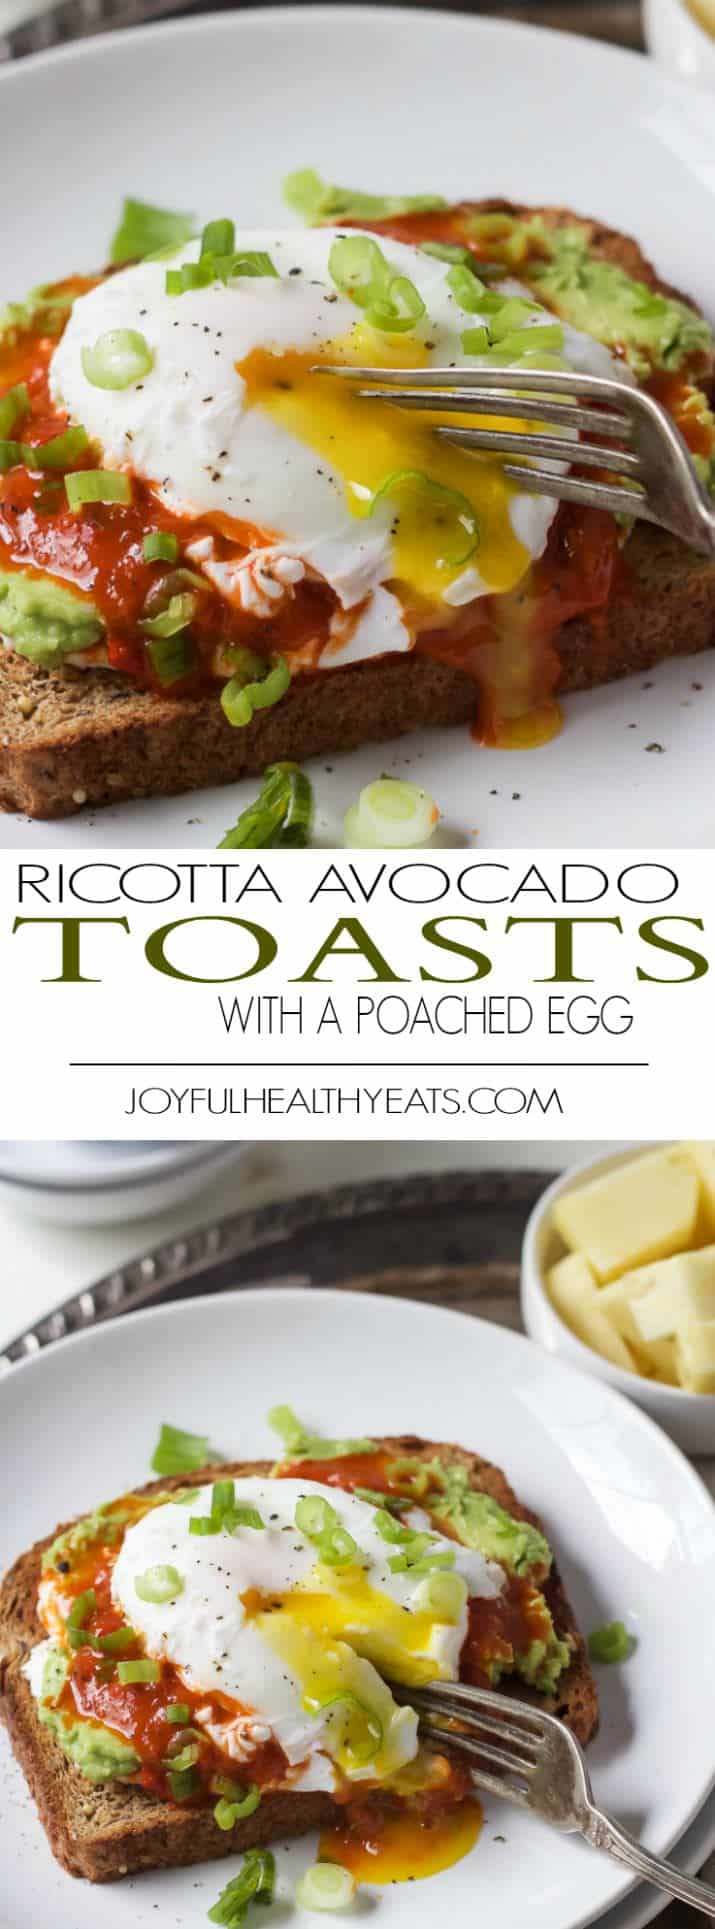 Ricotta Avocado Toast topped with Harissa and a Poached Egg, a heart healthy breakfast packed with protein and full of flavor for only 269 calories a serving! | joyfulhealthyeats.com #recipes